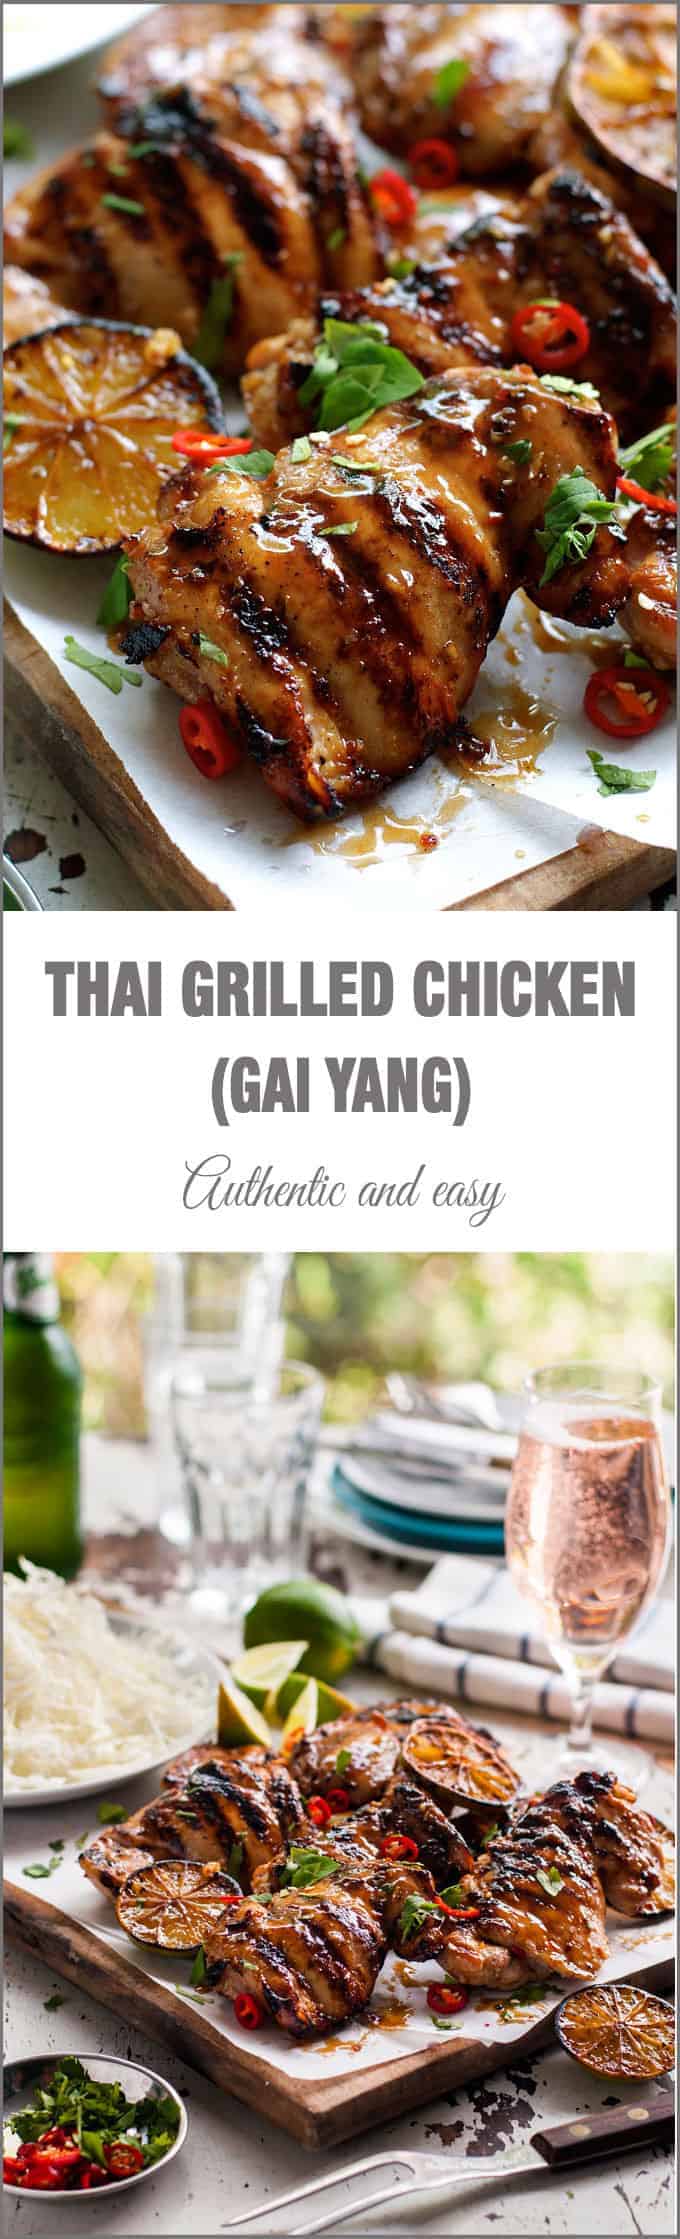 Thai Grilled Chicken (Gai Yang) - authentic flavours from the streets of Thailand!, easy to make on your BBQ, stove or oven!